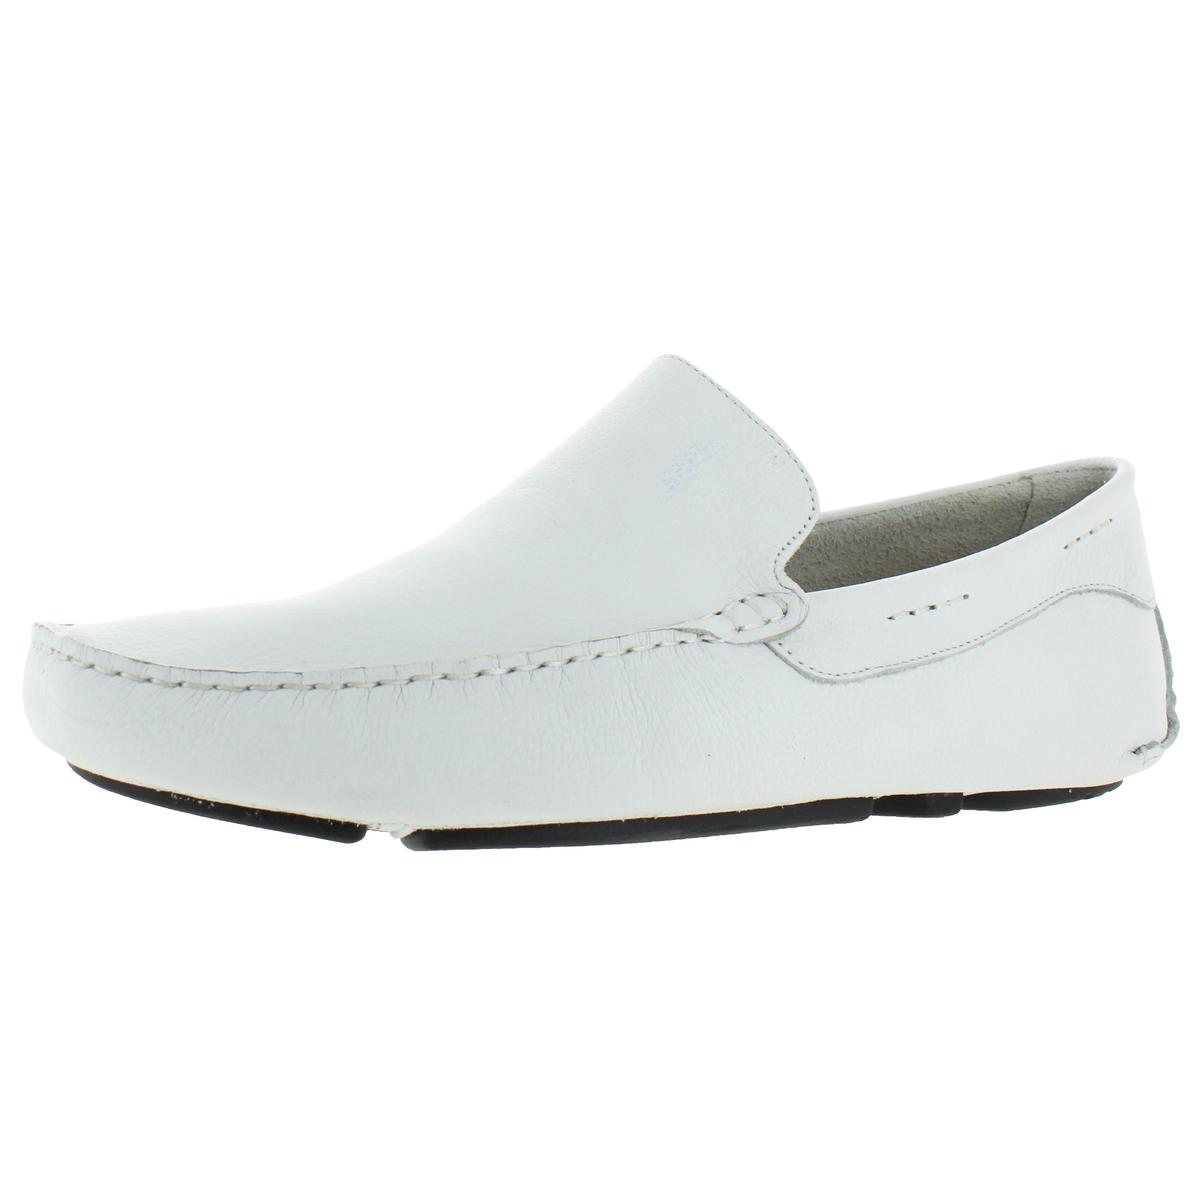 Giorgio Brutini Mens Trayger White Leather Loafers Shoes 12 Medium (D ...